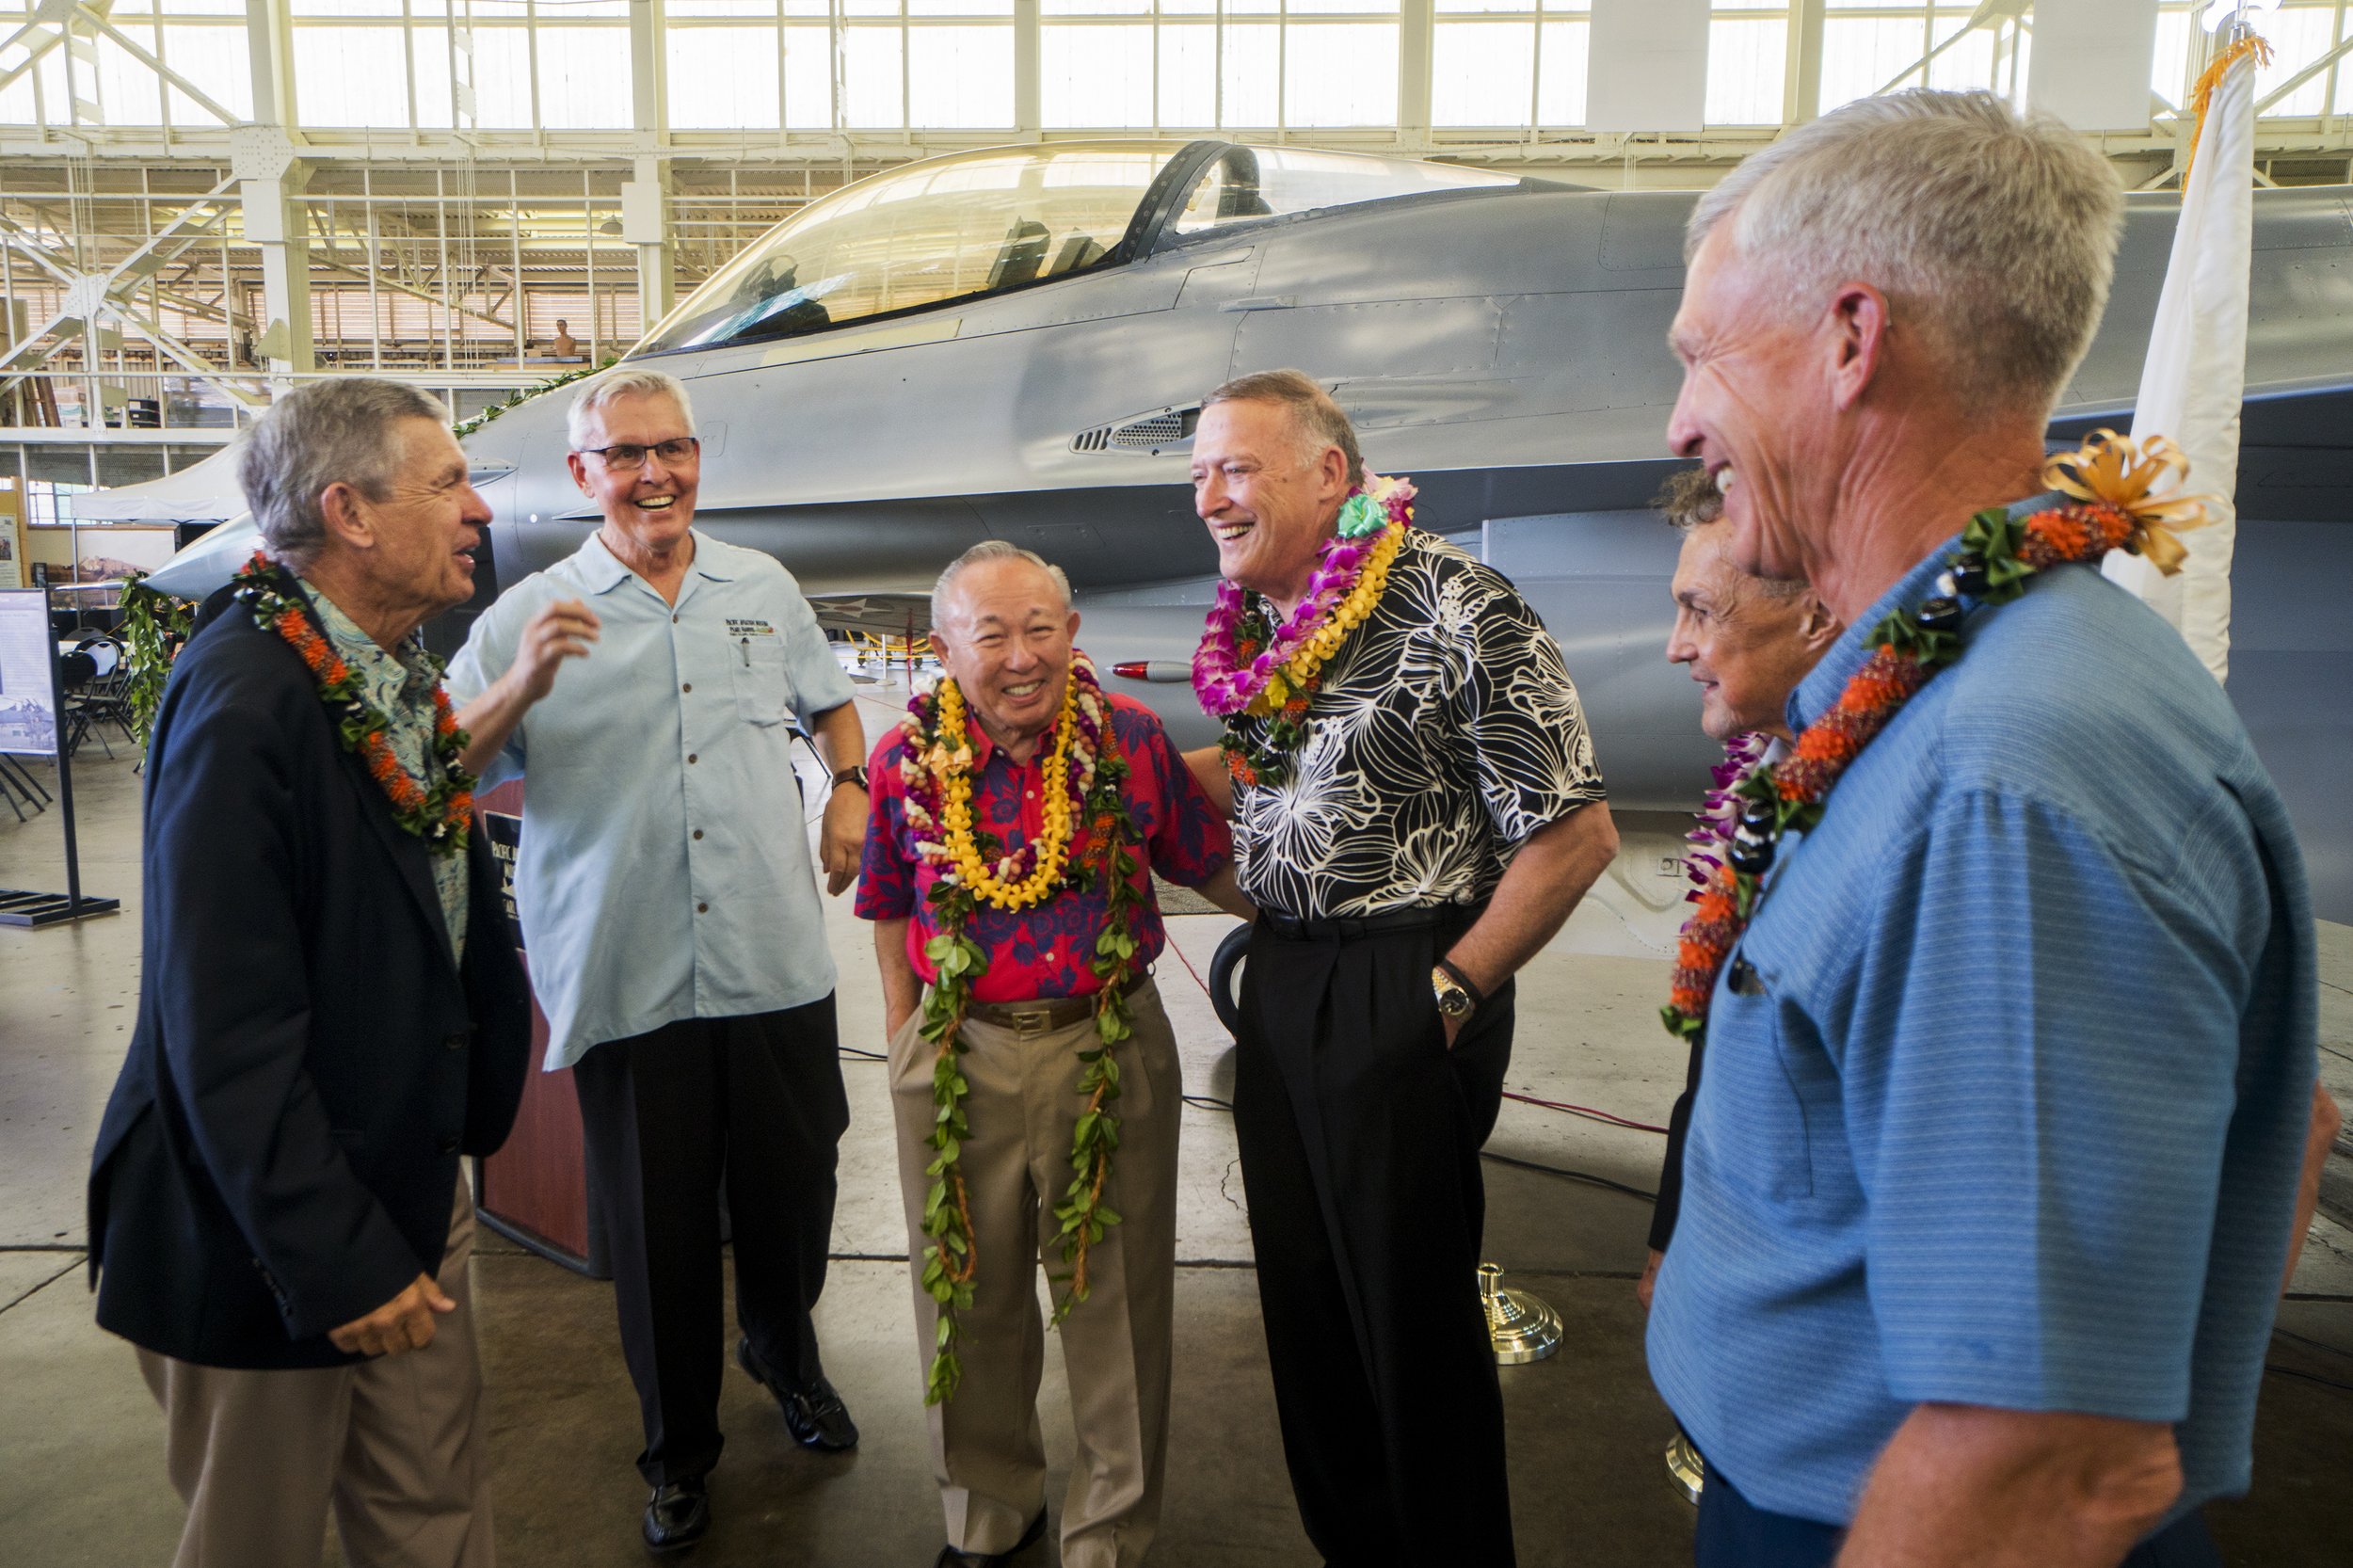  Tseu also gifted an F-16A Fighting Falcon to Pacific Aviation Museum Pearl Harbor in honor of retired Air Force Gen. Gary “Nordo” North. Standing next to the F-16 are (from left) retired Adm. R.J. “Zap” Zlatoper, museum executive director Ken DeHoff